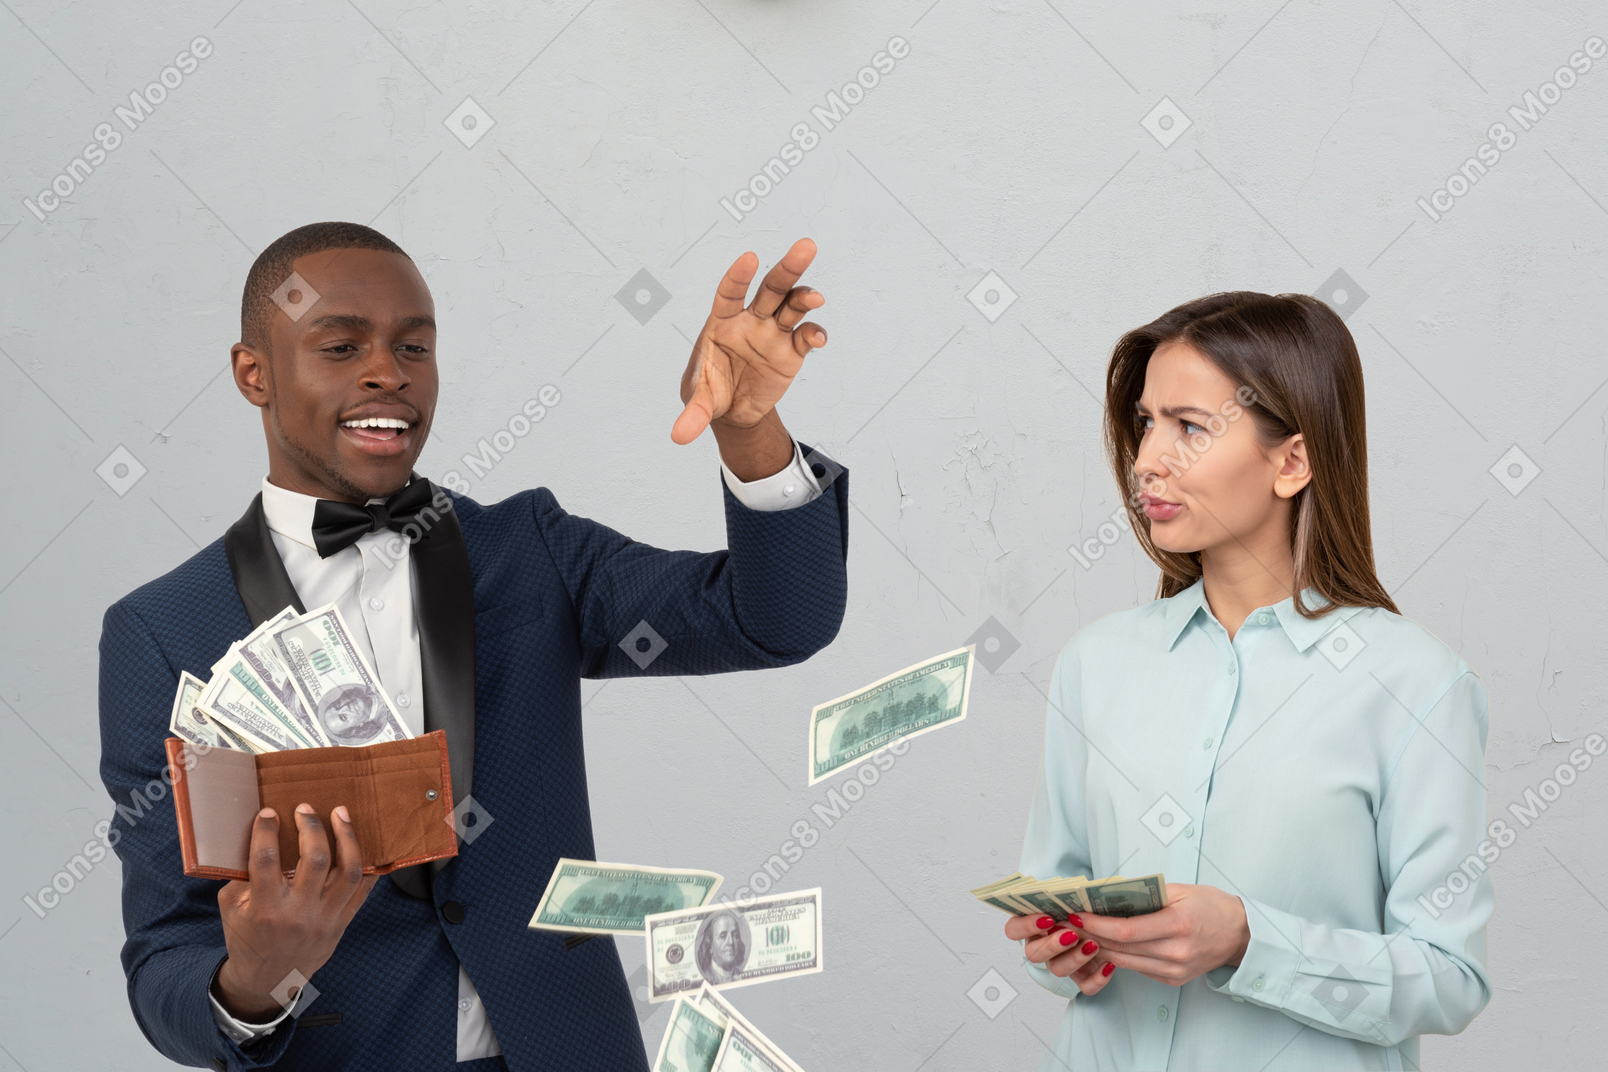 Black man is wasting the money while the woman is counting and saving it